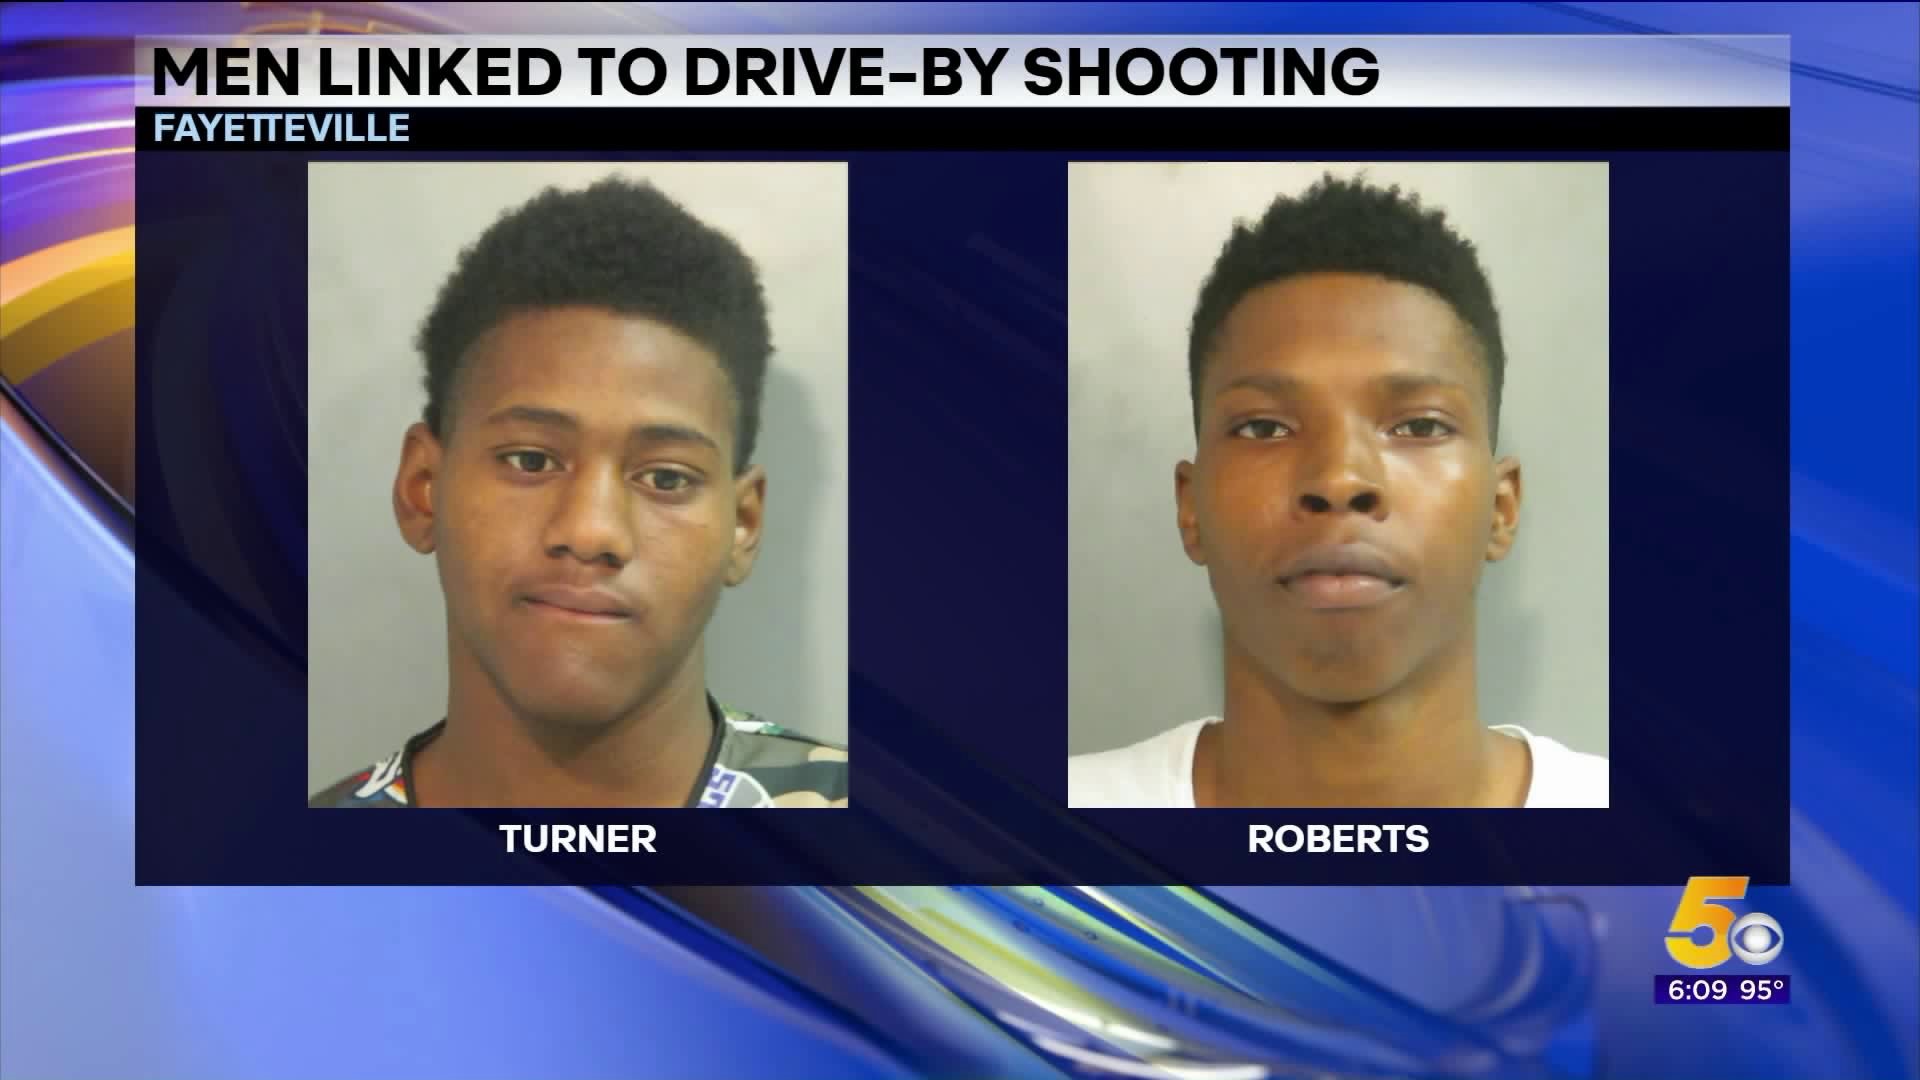 Men Linked To Drive By Shooting in Fayetteville